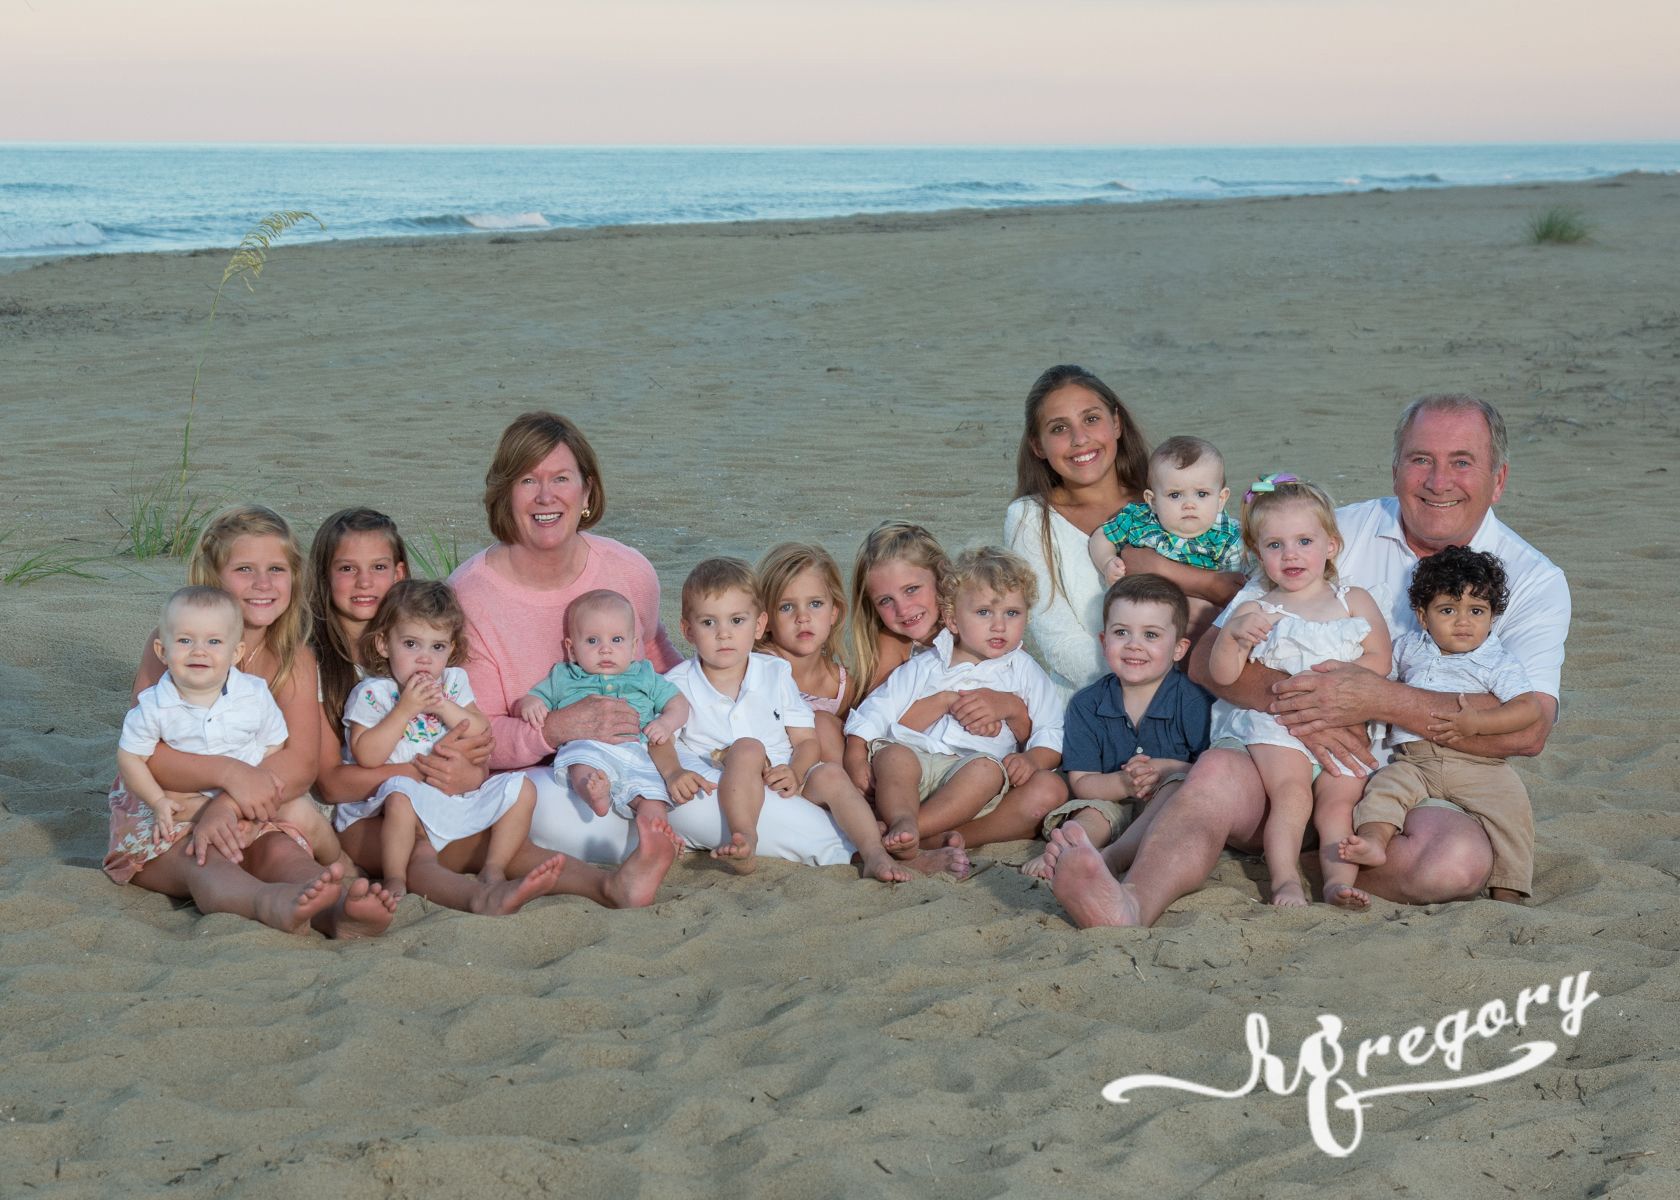 Woltjen family and children sitting on beach pic